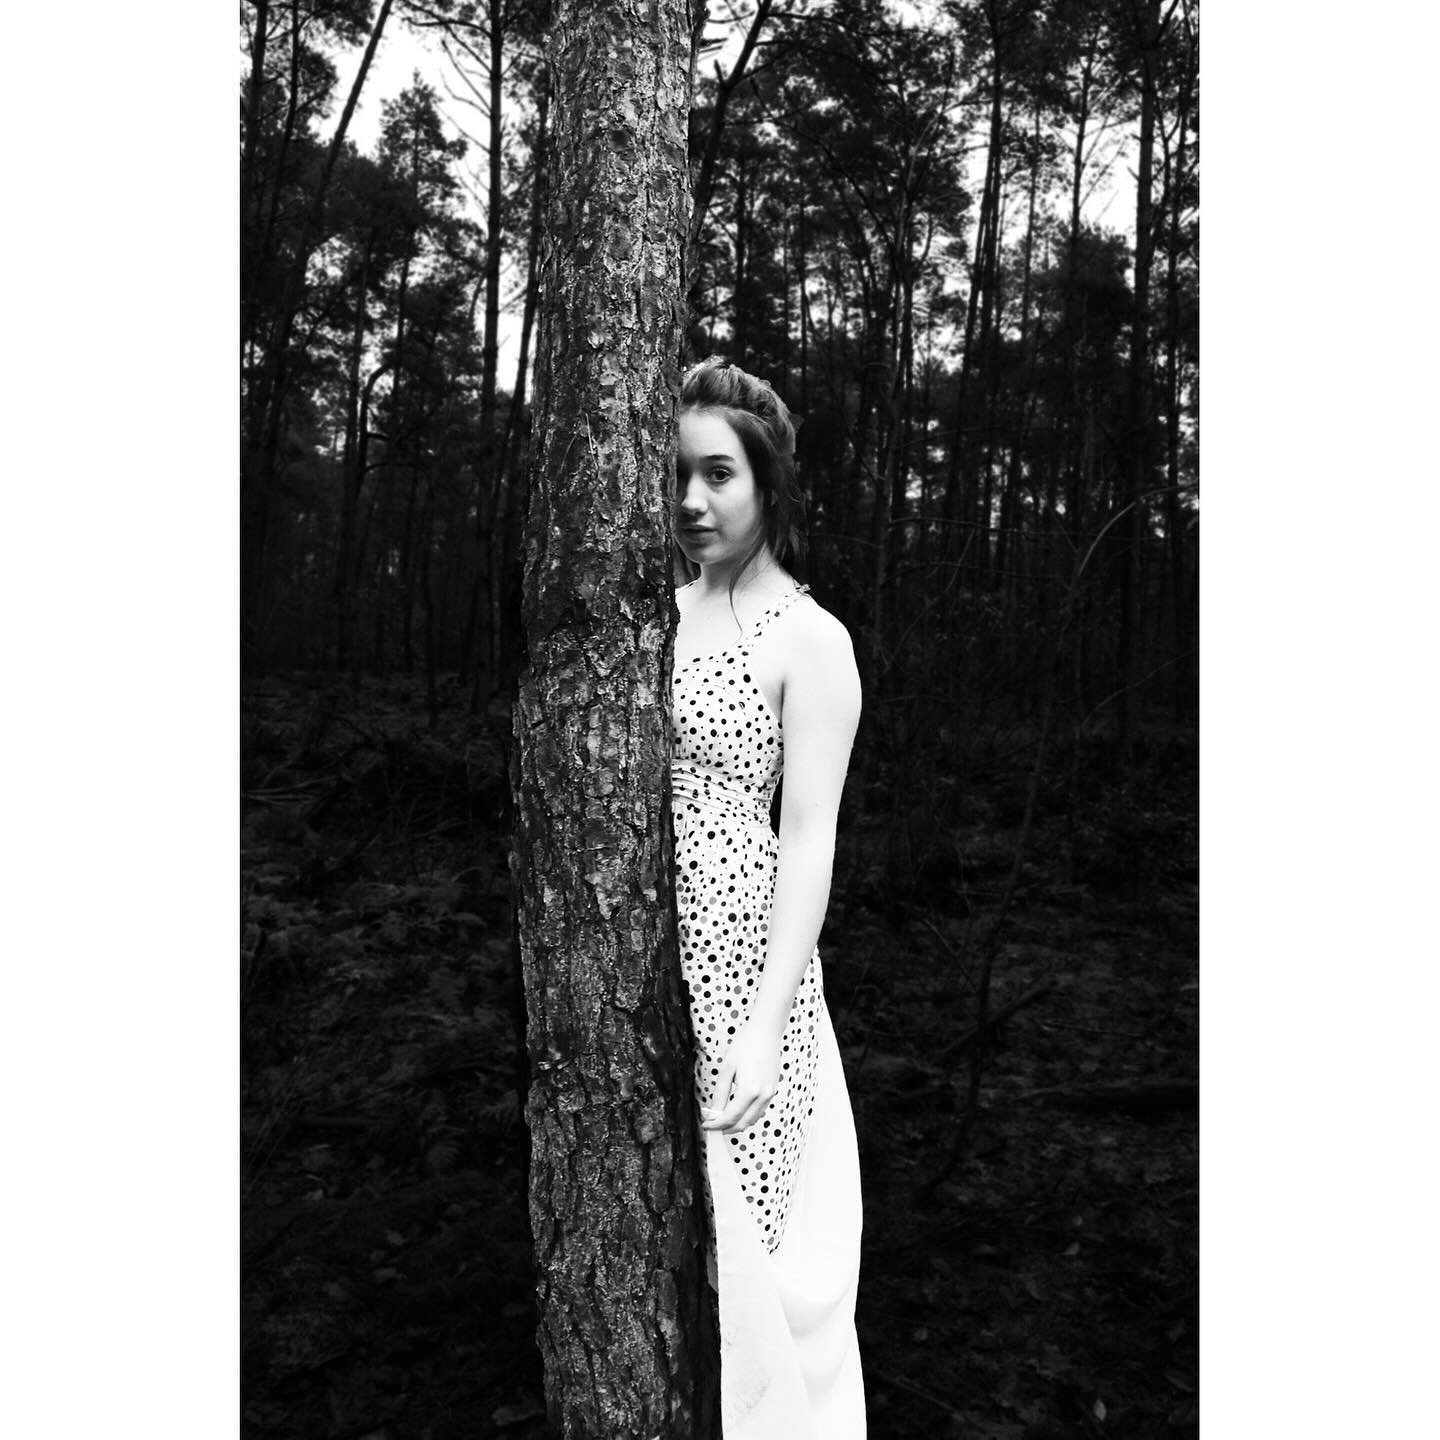 Thank you so much @circle.foundation for the feature of Fall (Fauve) in Spotlight 37.
The magazine looks beautiful 💫
And thank you, my sweet  @livvantschip 🤍
#circleforthearts #artmagazine #photography #monochromephotography #eloquence_photo #nouve